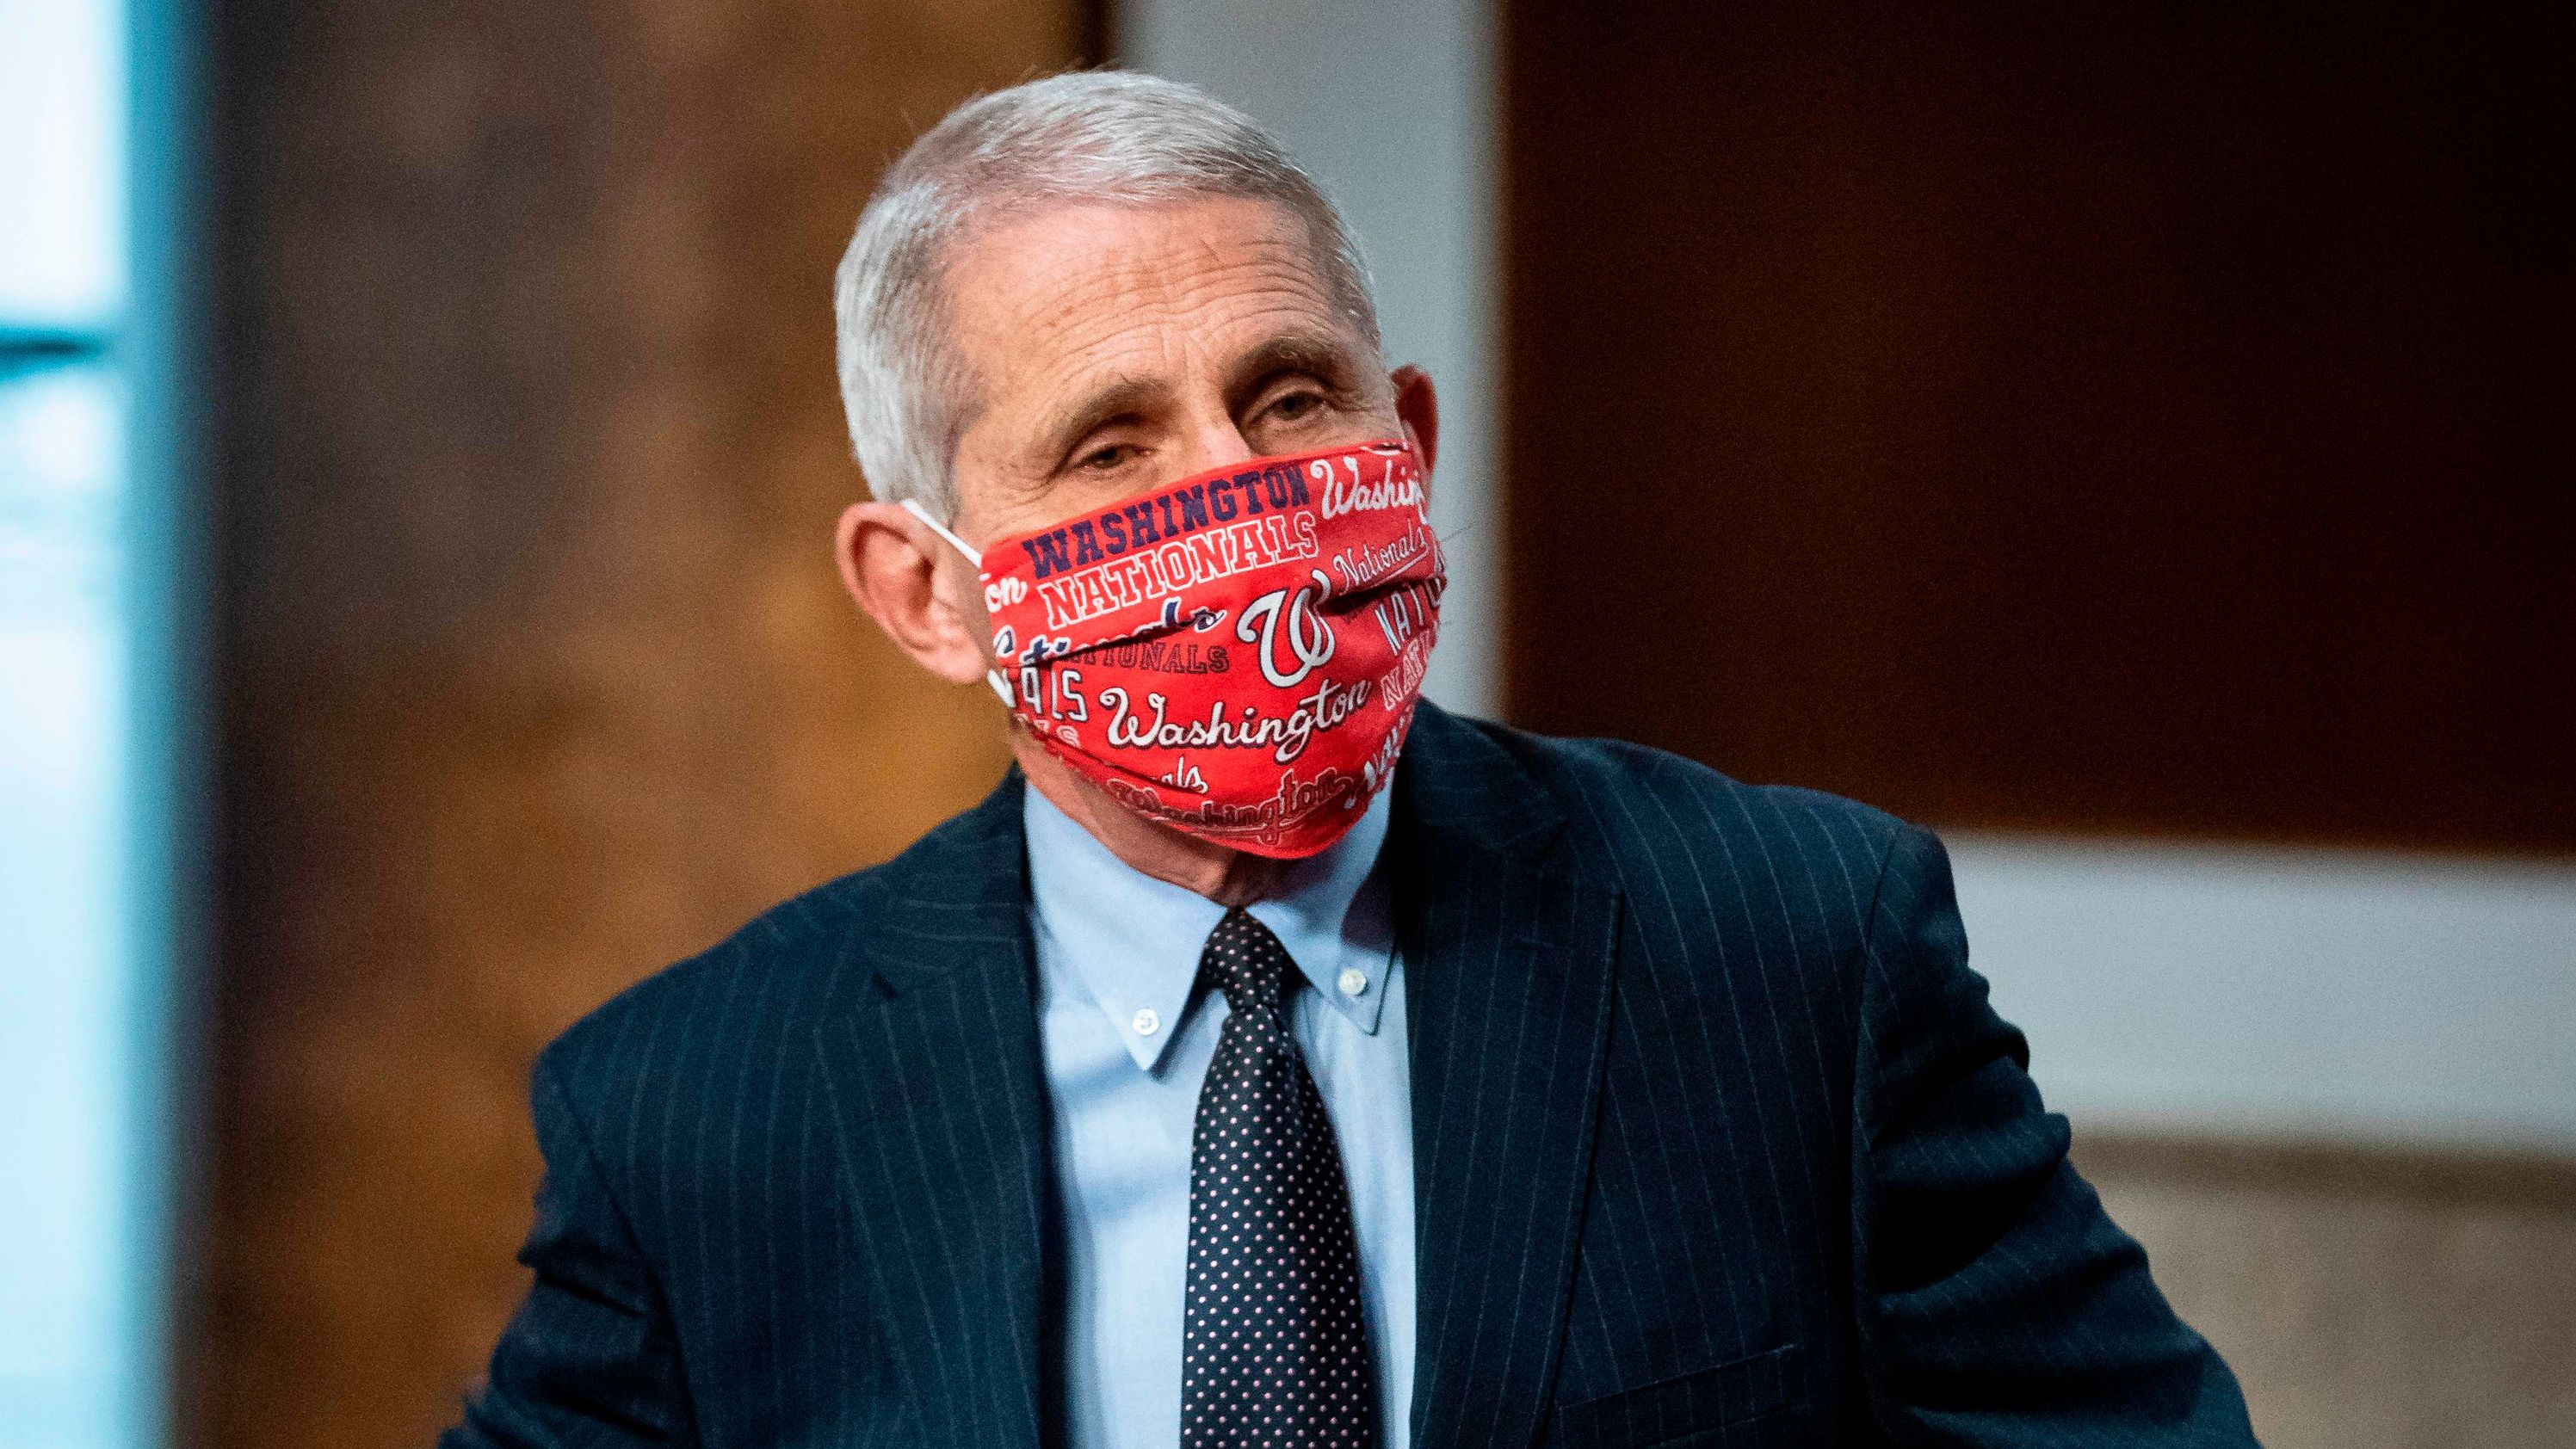 Anthony Fauci, director of the National Institute of Allergy and Infectious Diseases, wears a Washington Nationals face covering as he arrives during a Senate Health, Education, Labor and Pensions Committee hearing in Washington, DC, on June 30. 